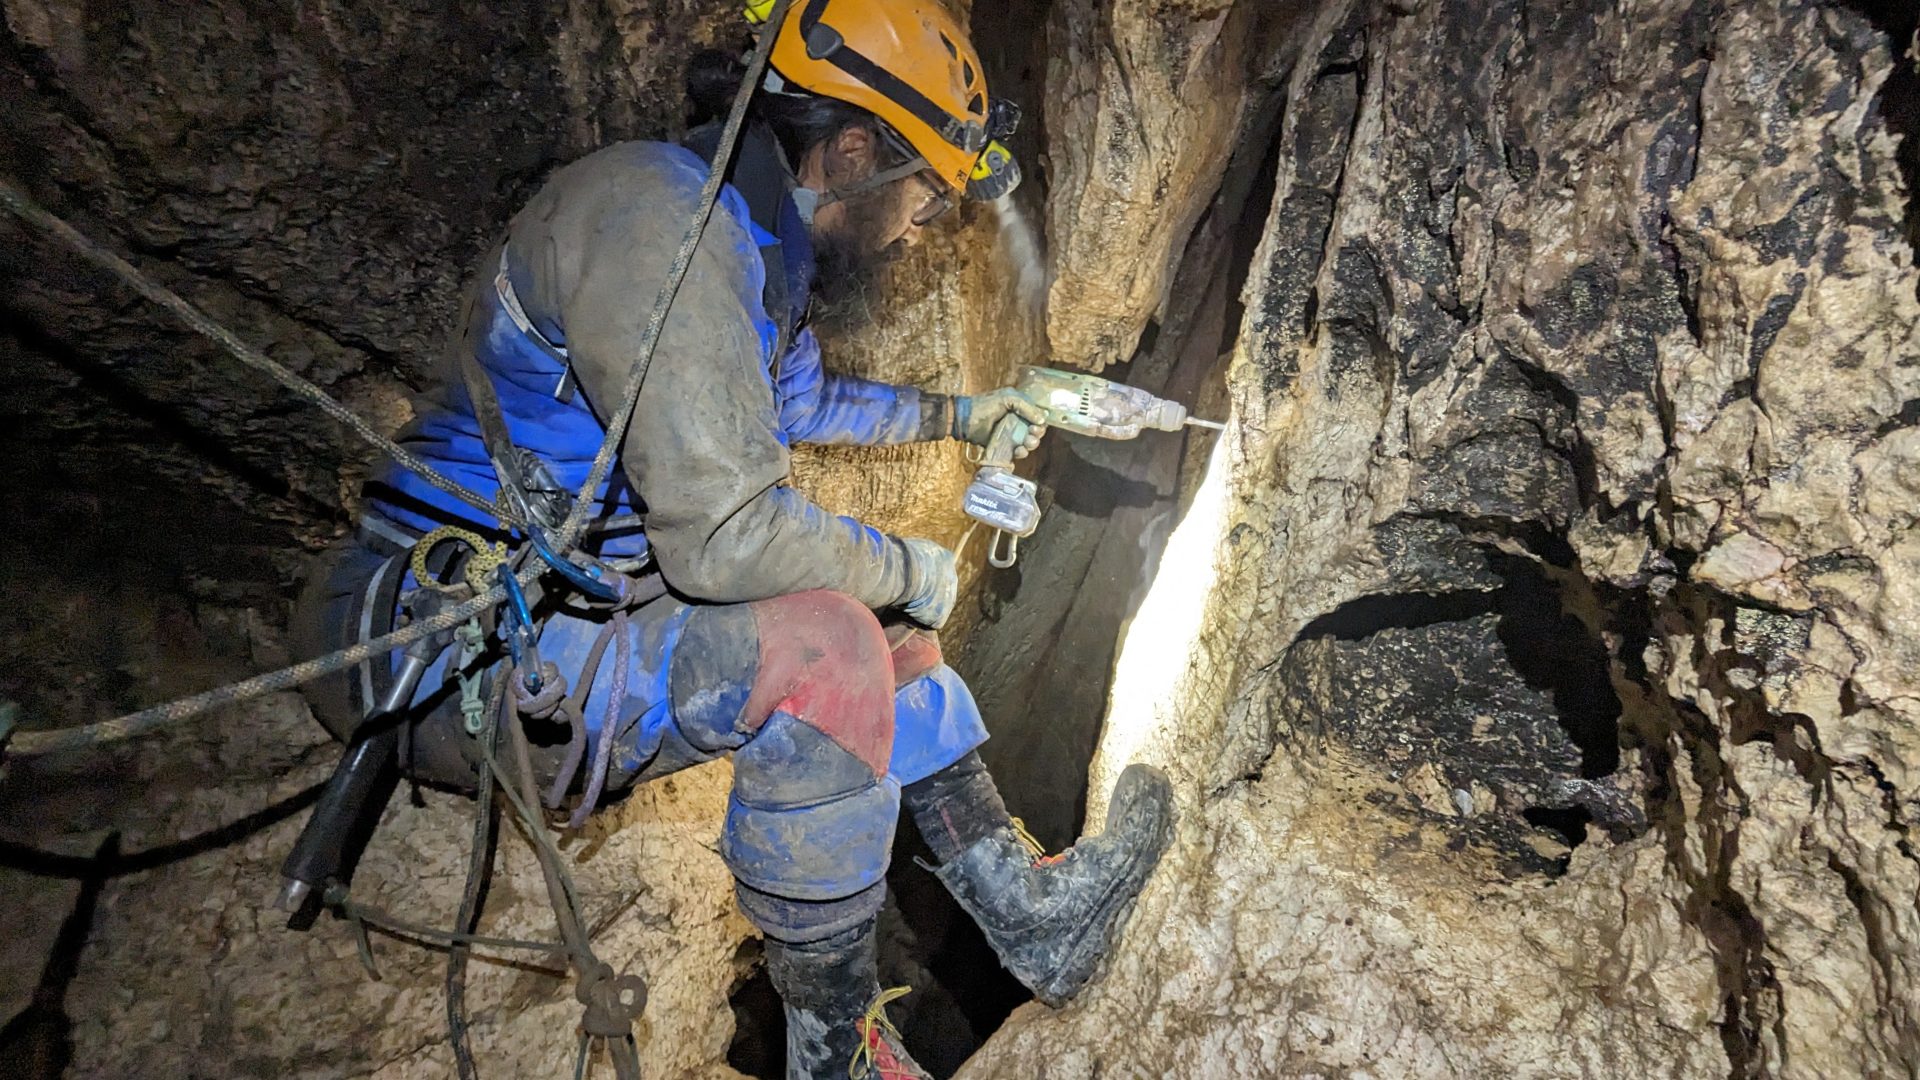 A caver drilling a hole at the top of a pitch while attached to a traverse line